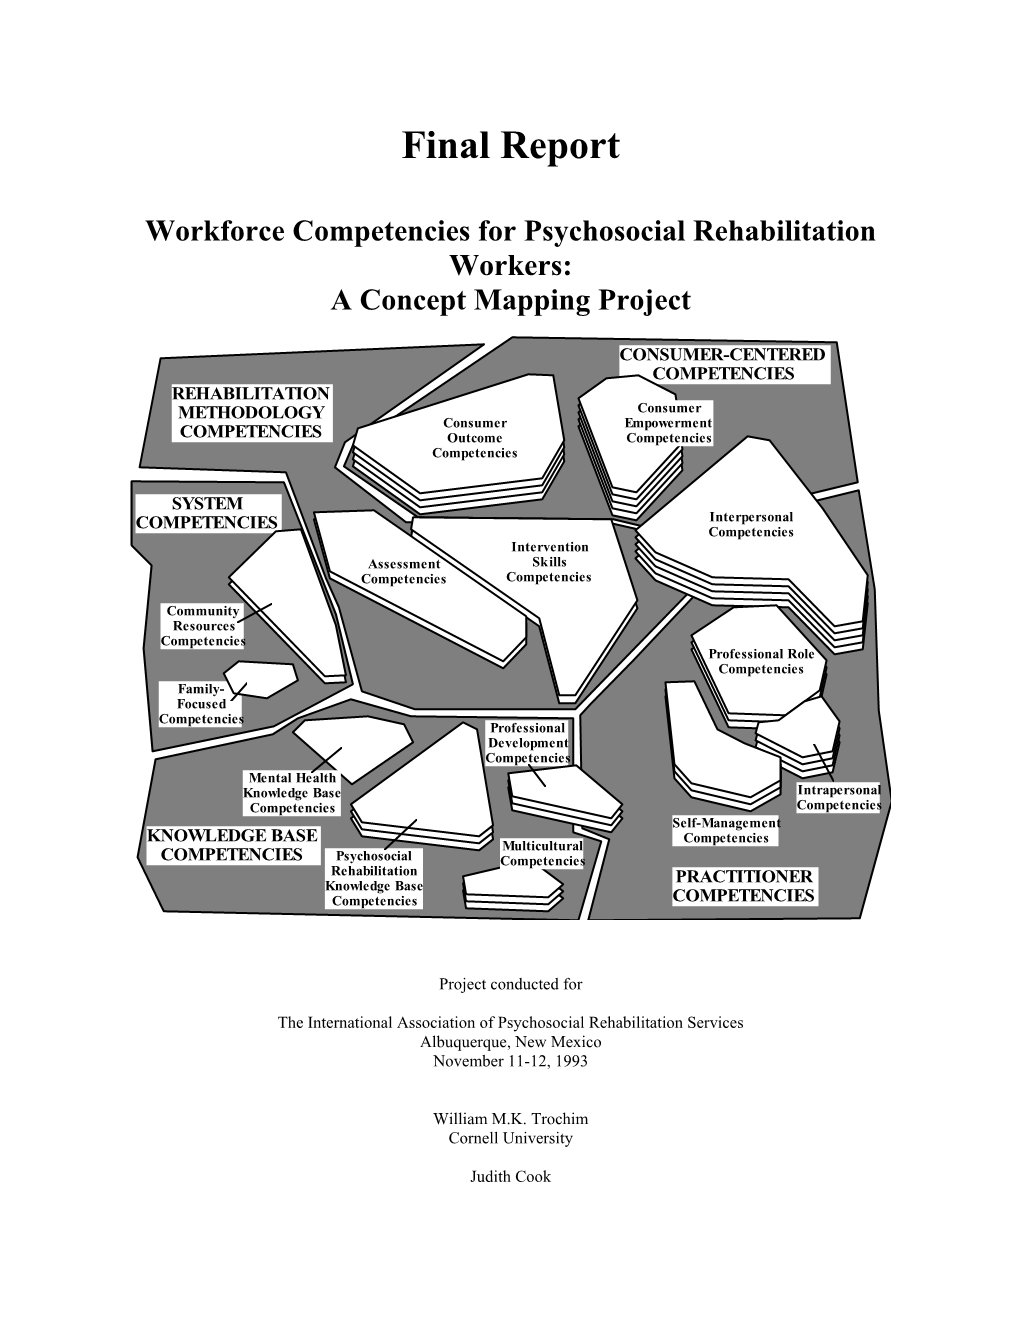 Workforce Competencies for Psychosocial Rehabilitation Workers